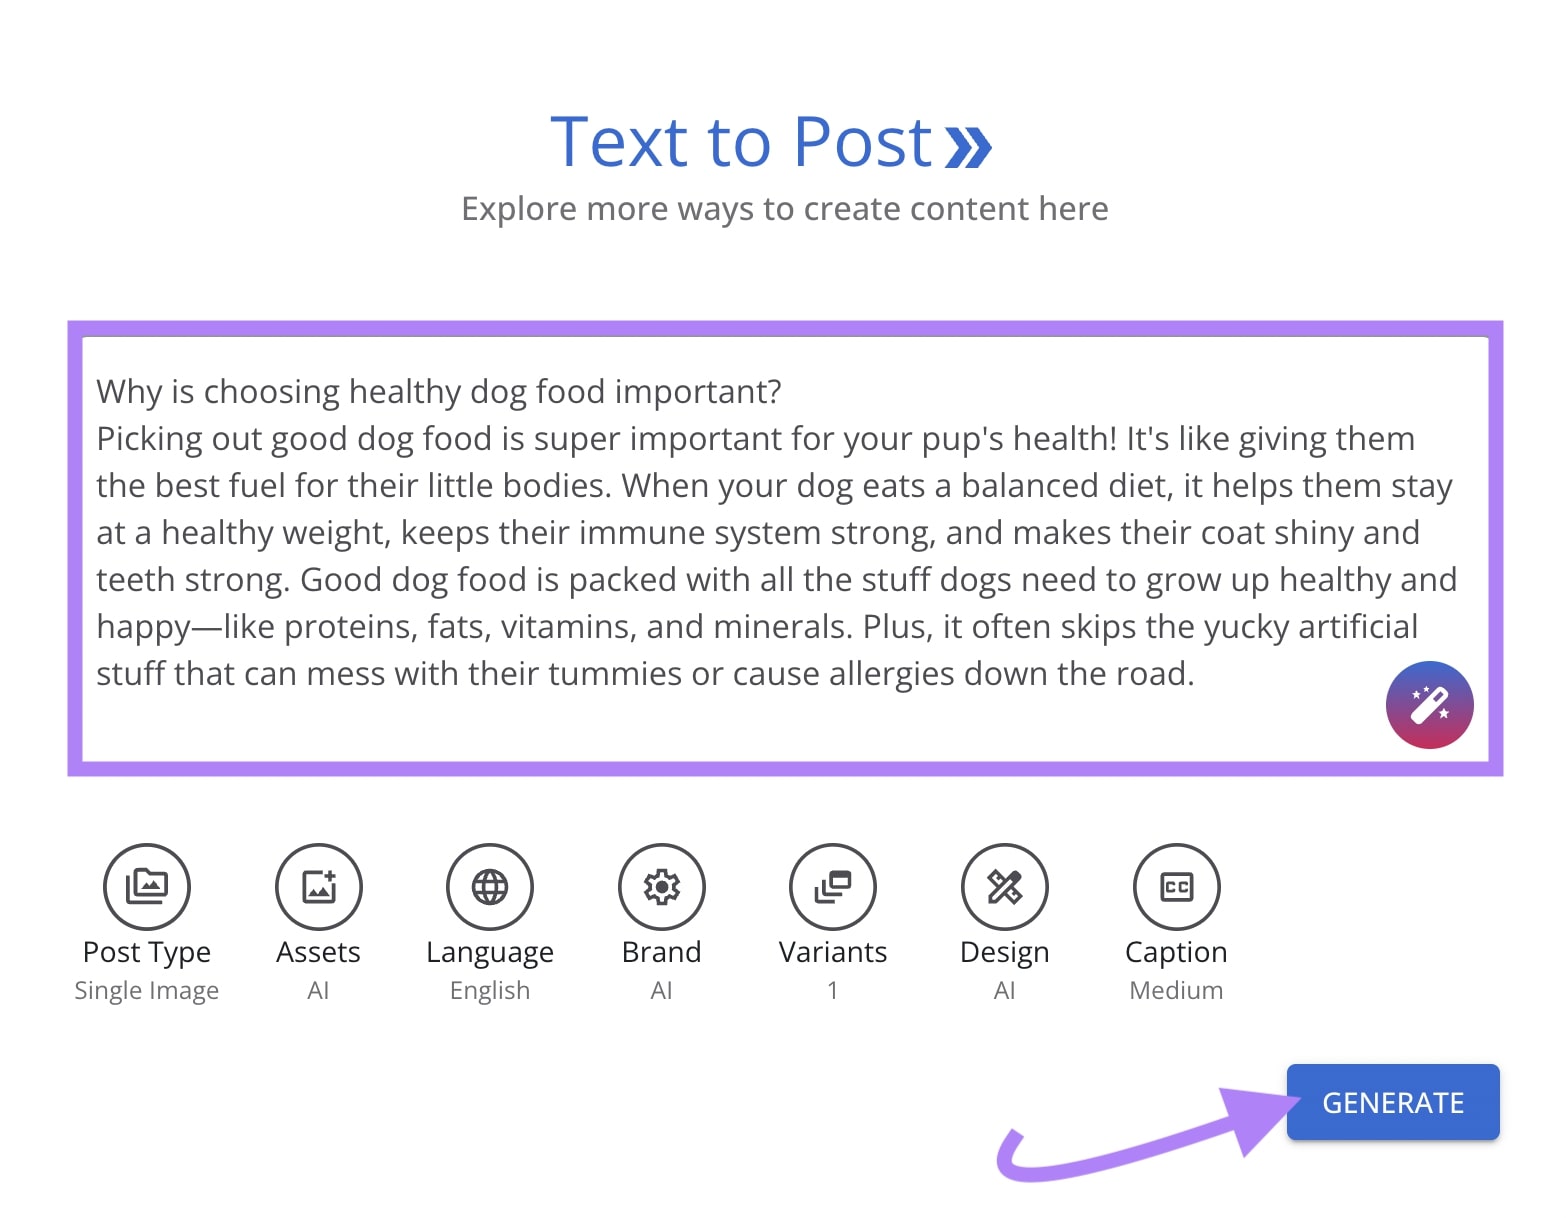 Text to post section of the Semrush AI Content Generator tool with text describing why choosing healthy dog food is important